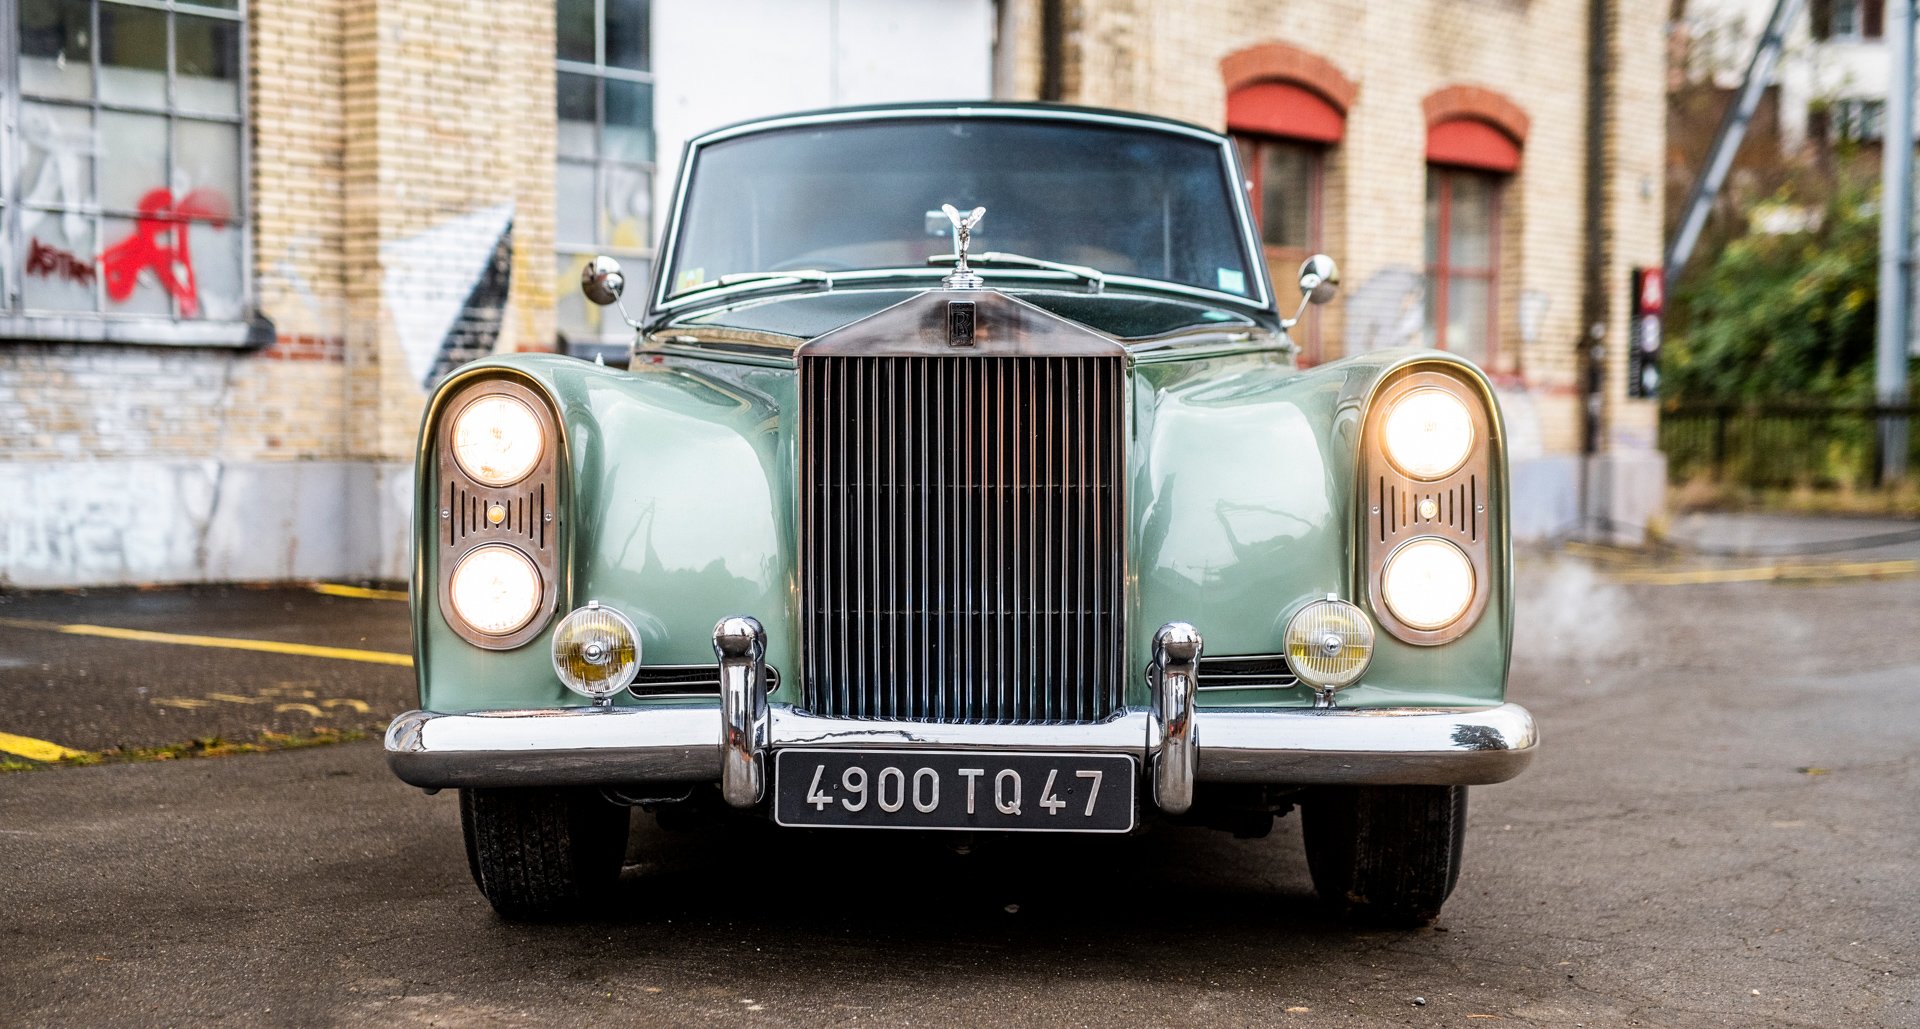 Embrace eccentric extravagance with this oil baron’s bespoke Rolls-Royce<br />
